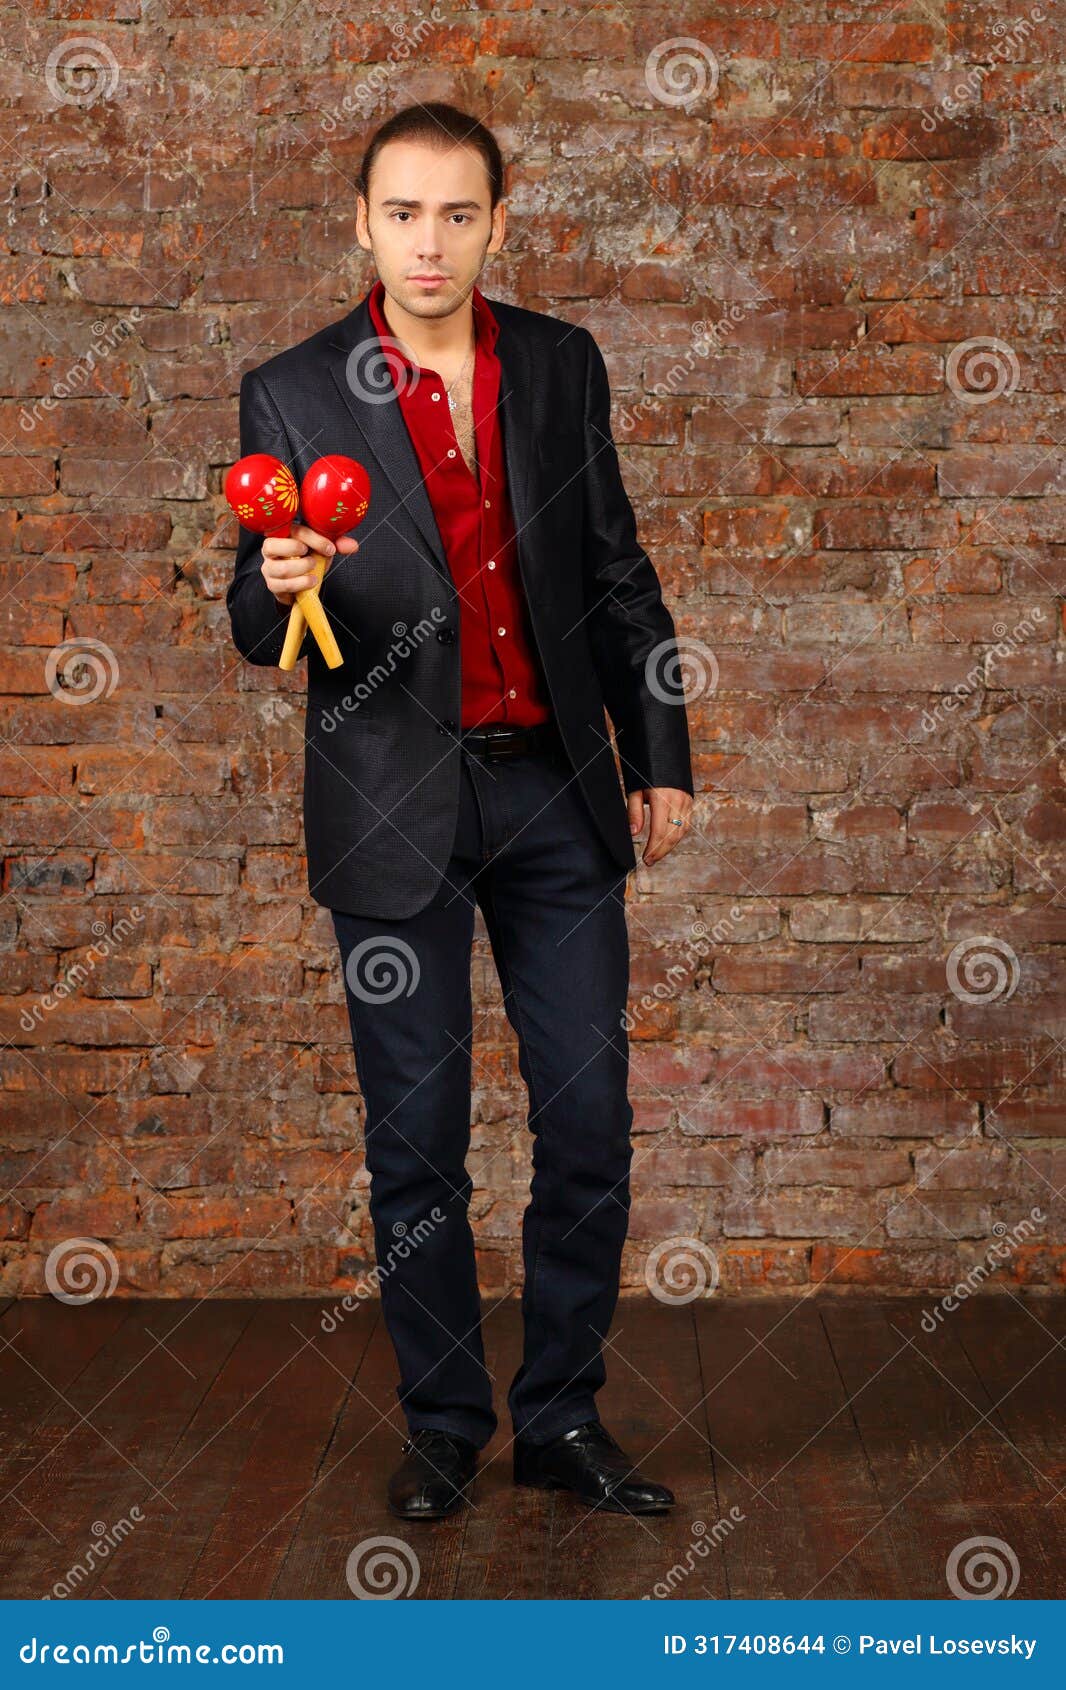 young man in suit stands with maracas in studio